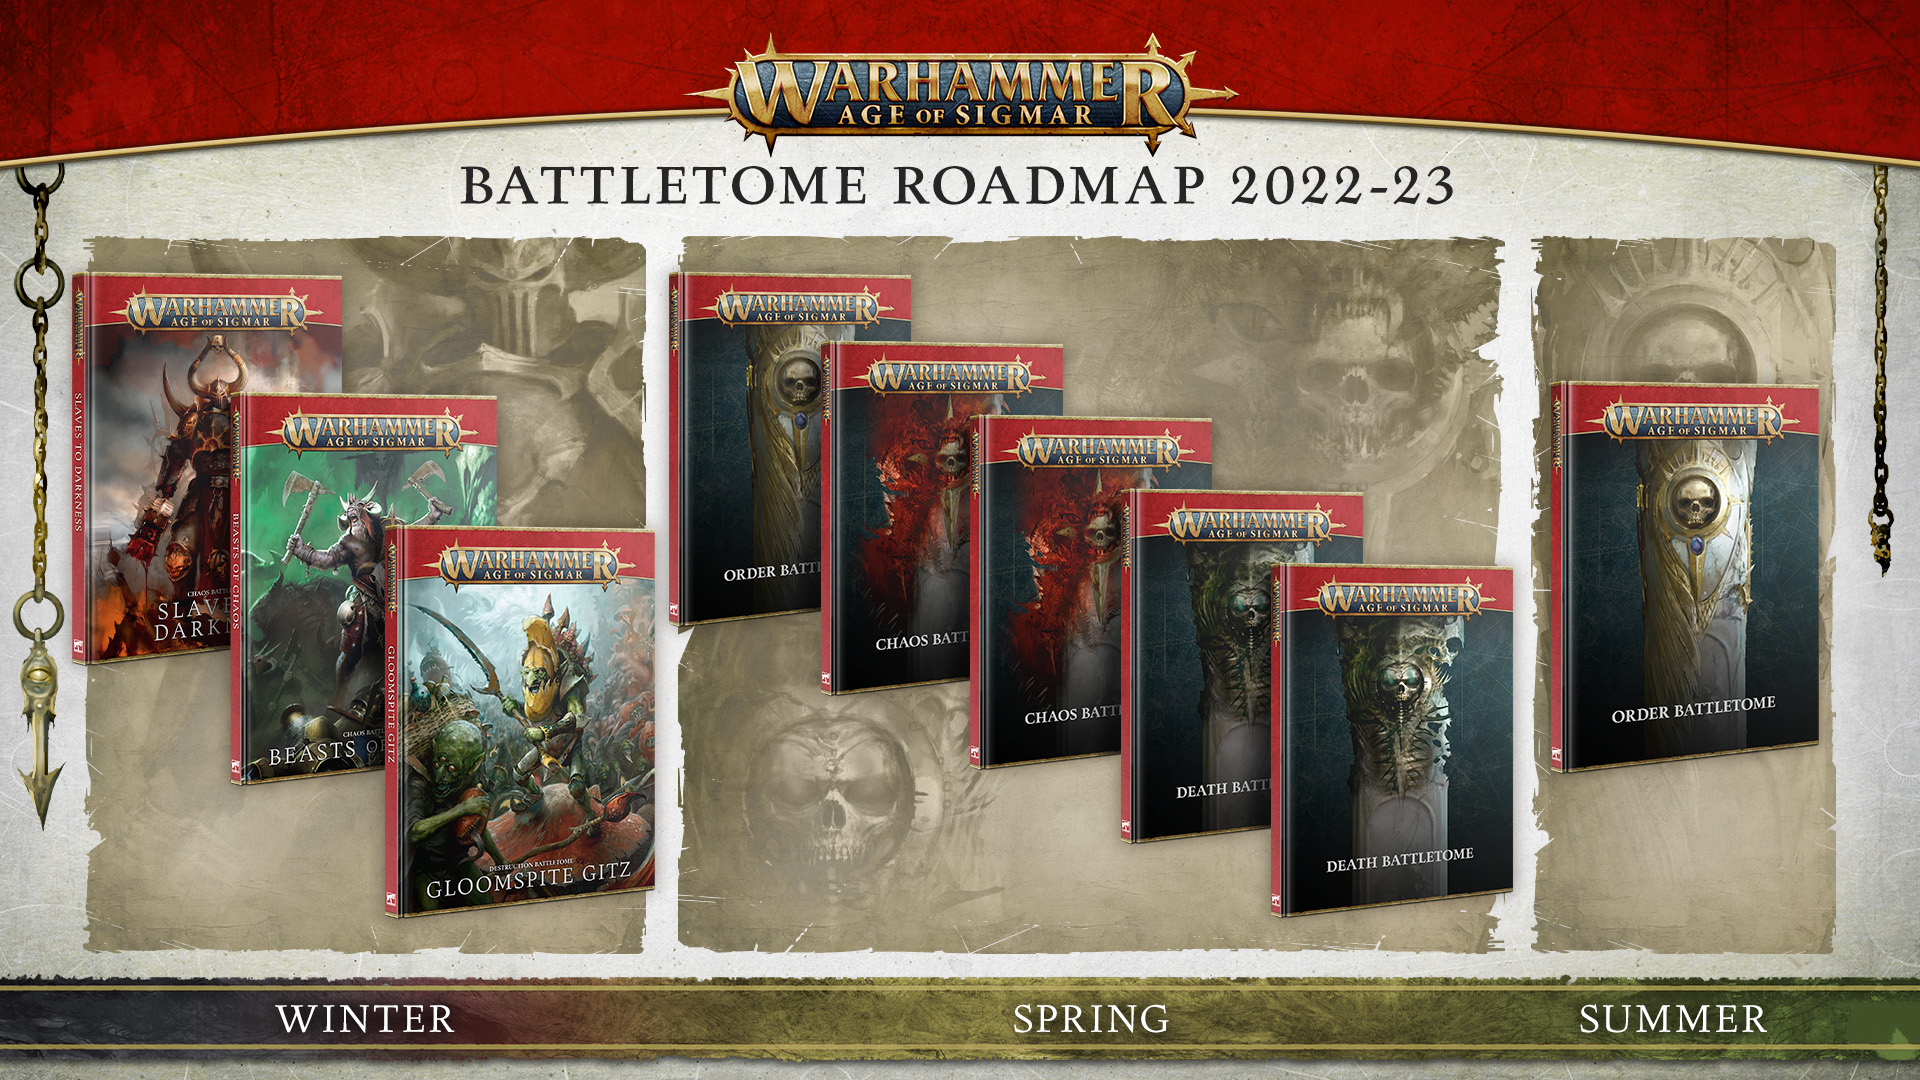 The future of AOS 2023 War of Sigmar Warhammer 40000 + Age of